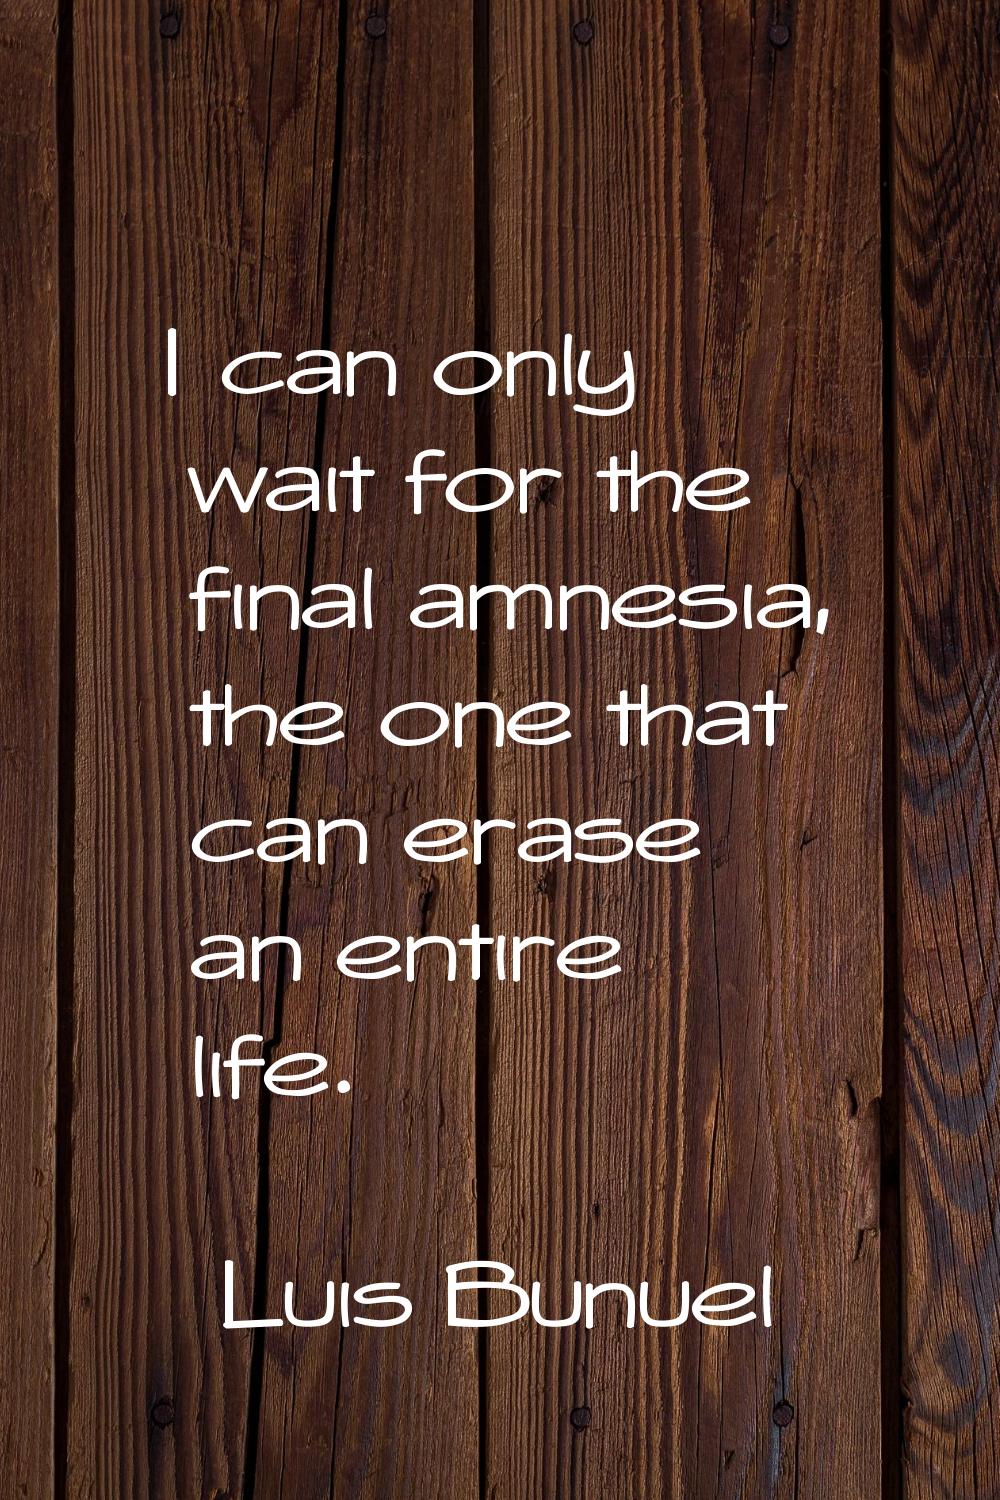 I can only wait for the final amnesia, the one that can erase an entire life.